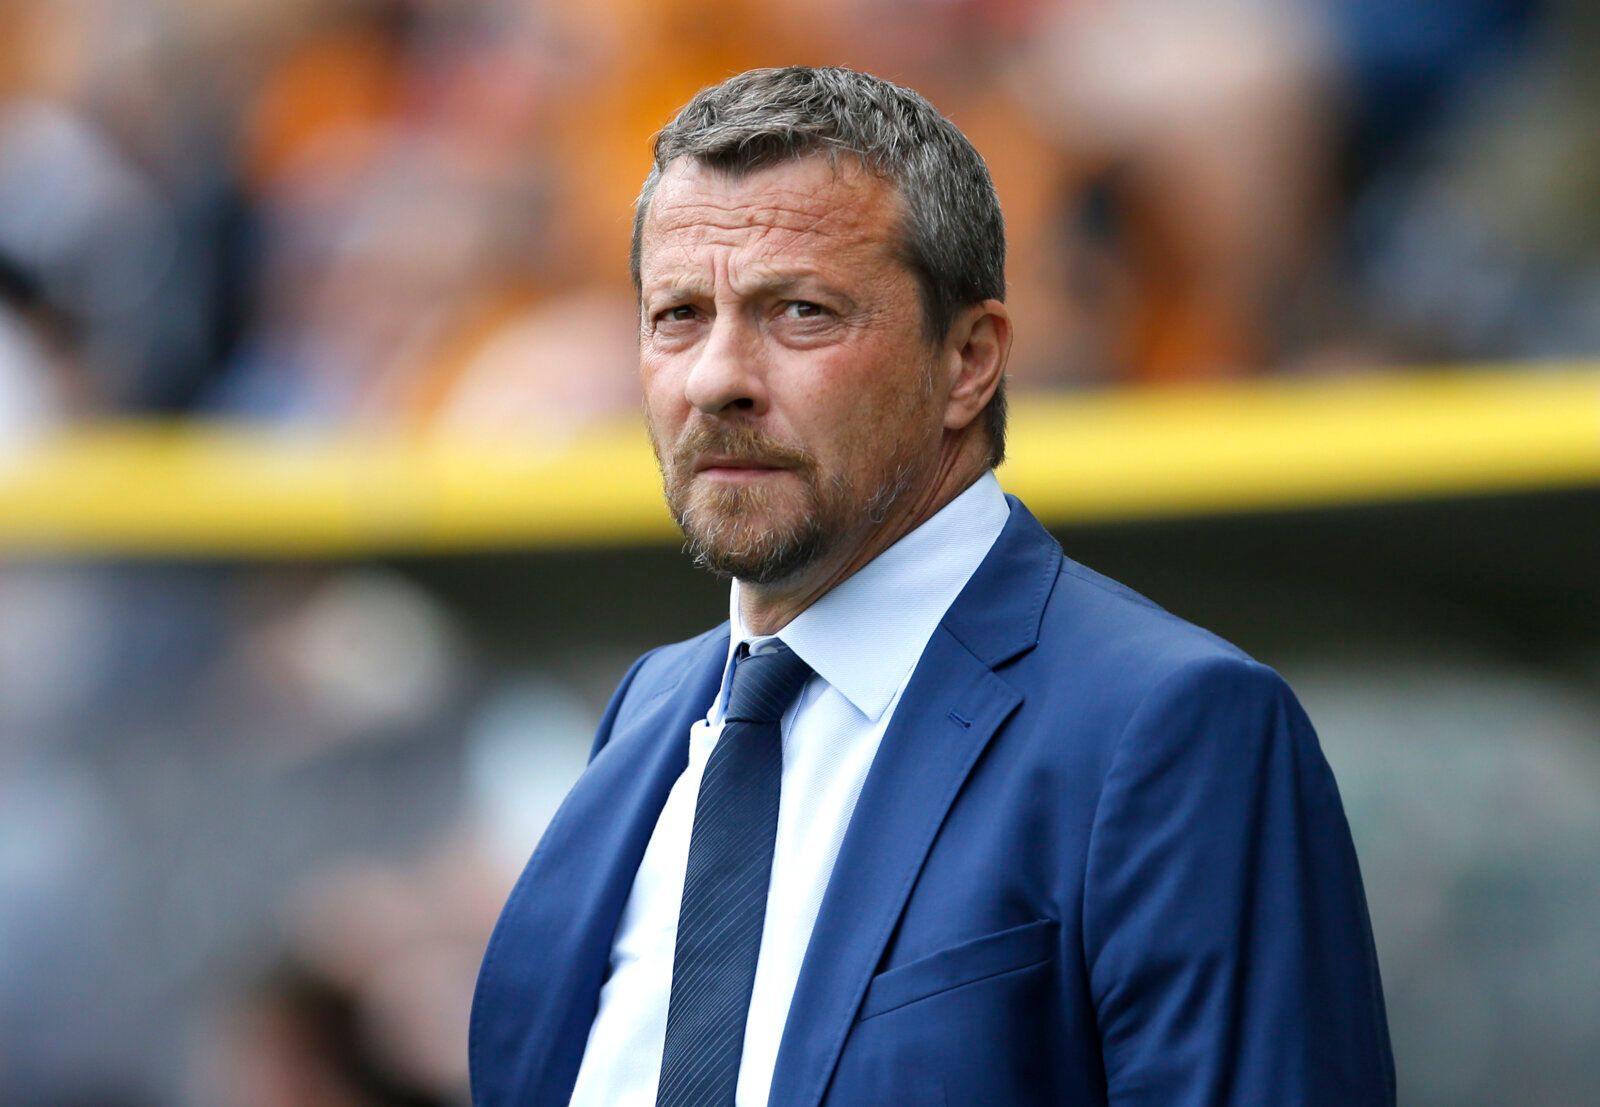 Soccer Football - Championship - Hull City v Sheffield United - KCOM Stadium, Hull, Britain - September 18, 2021 Sheffield United manager Slavisa Jokanovic looks on Action Images/Ed Sykes EDITORIAL USE ONLY. No use with unauthorized audio, video, data, fixture lists, club/league logos or 'live' services. Online in-match use limited to 75 images, no video emulation. No use in betting, games or single club /league/player publications.  Please contact your account representative for further details